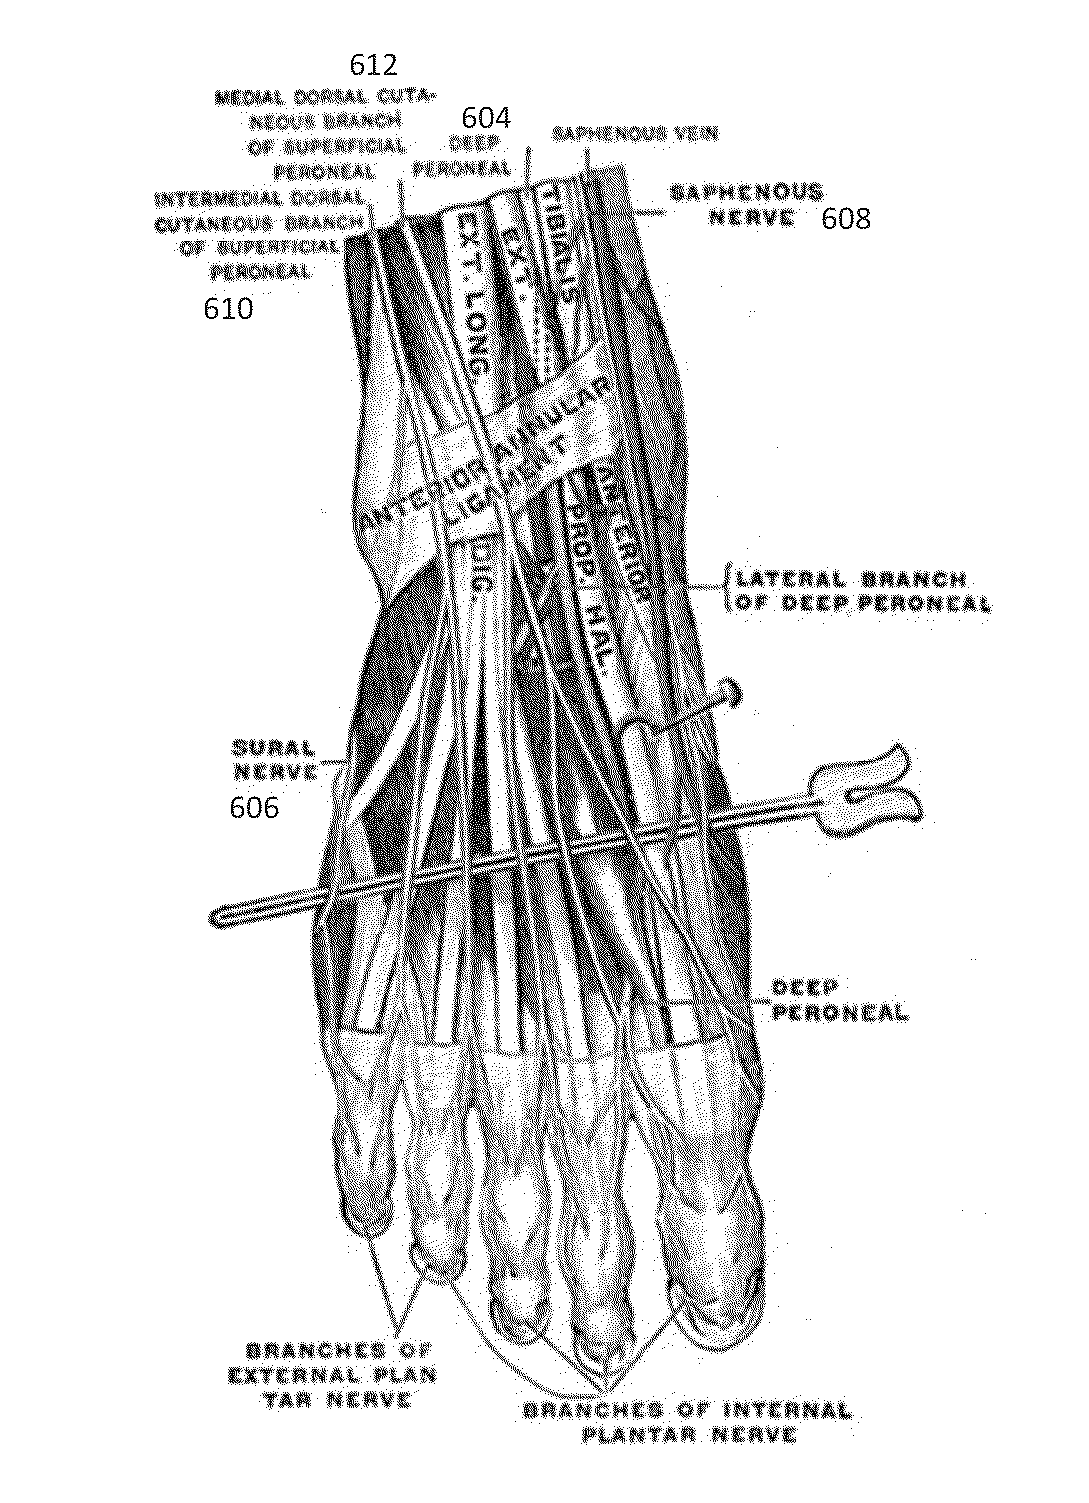 Methods, Systems, and Devices for Treating Neuromas, Fibromas, Nerve Entrapment, and/or Pain Associated Therewith